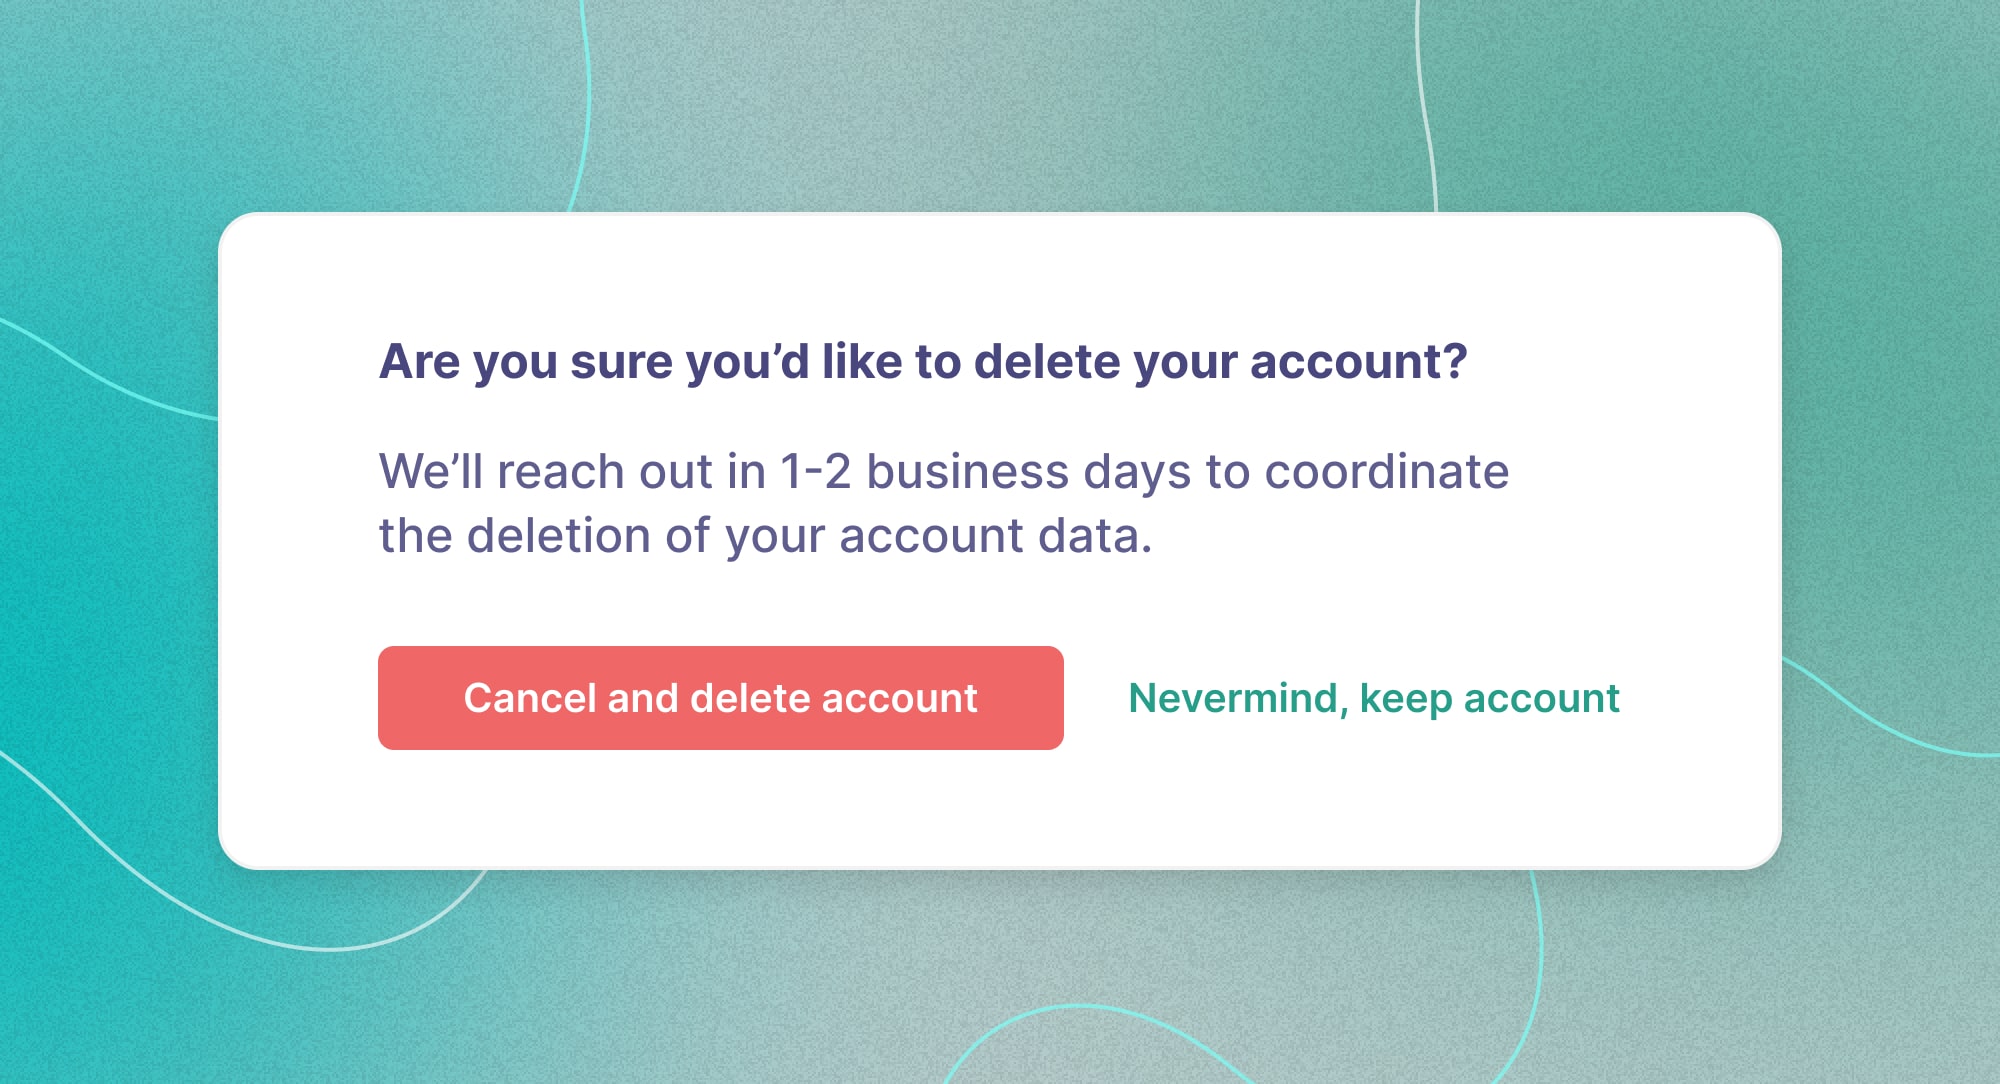 A good example of UI that shows clear steps in deleting one's account, reading 'Are you sure you'd like to delete your account? We'll reach out in 1-2 business days to coordinate the deletion of your account data